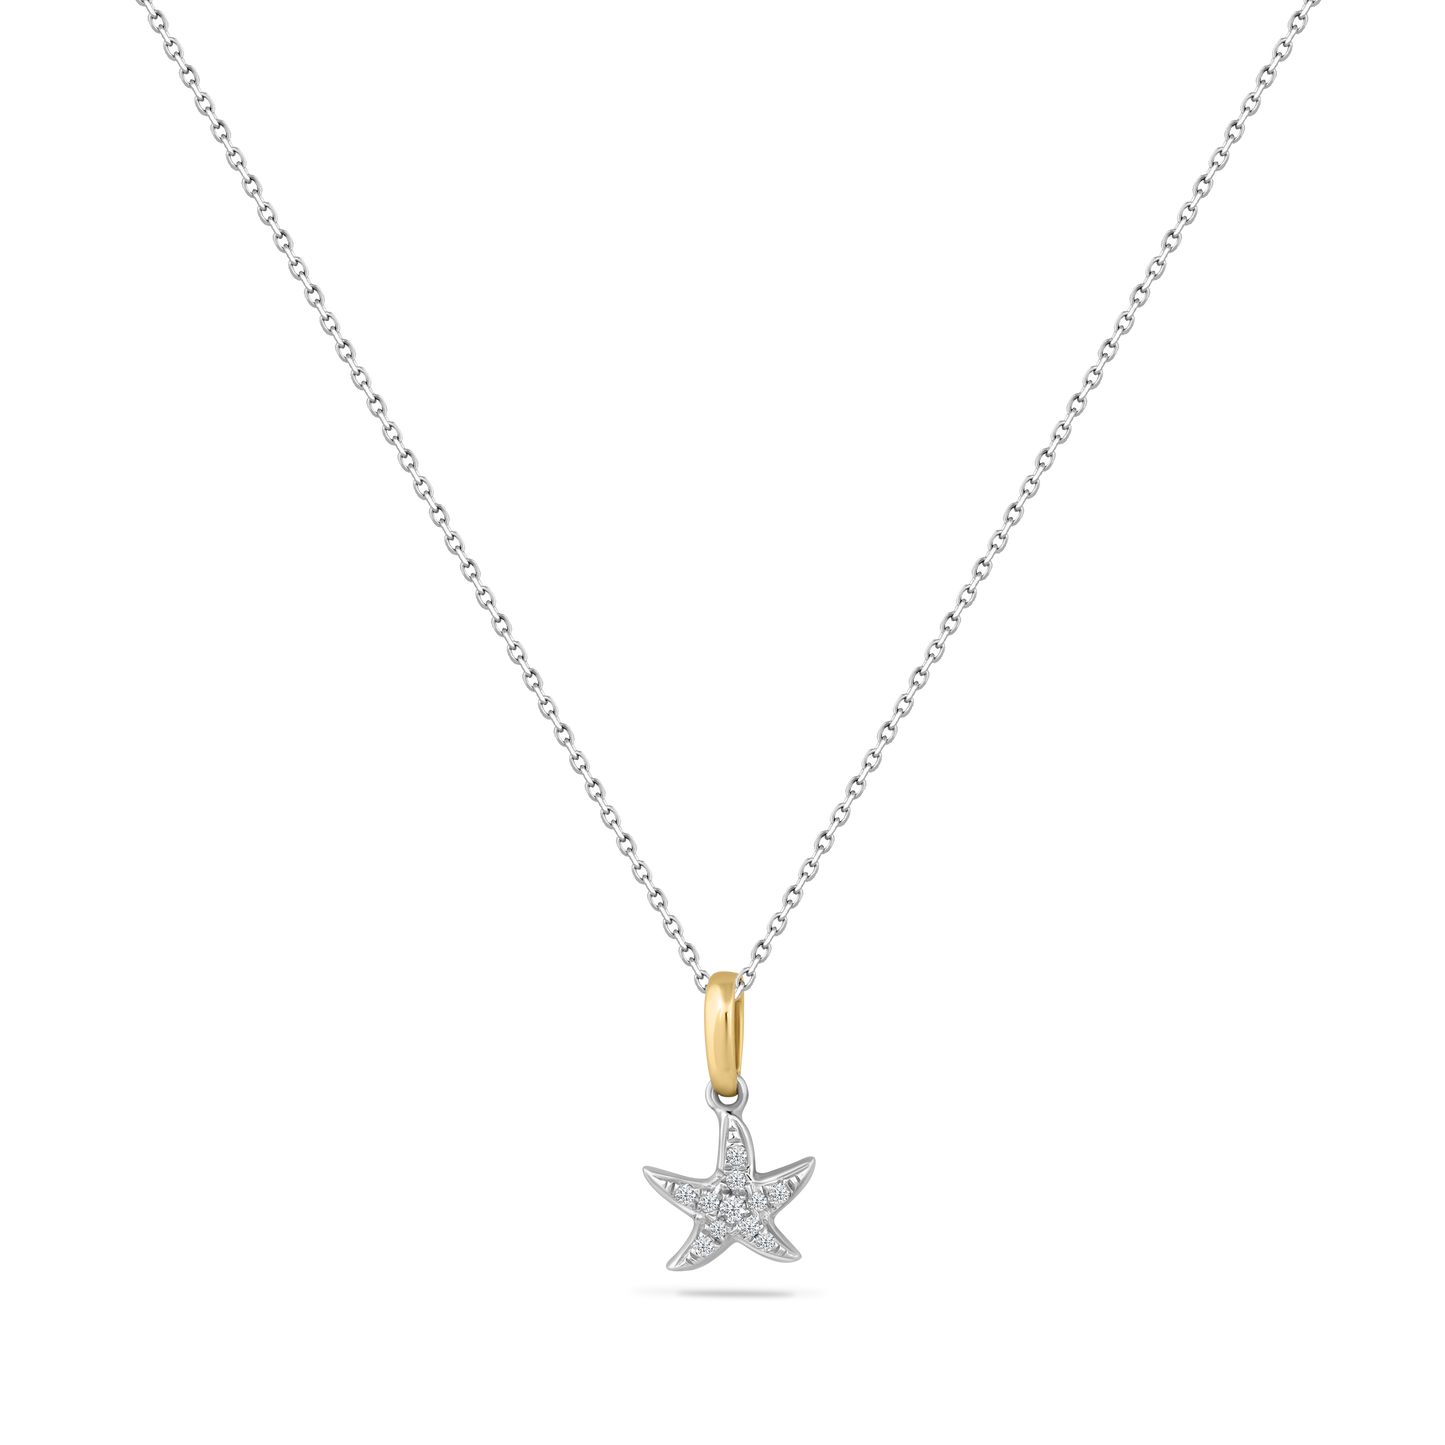 14K TWO TONE SINGLE STARFISH PENDANT WITH 11 DIAMONDS 0.05CT ON 18 INCHES CABLE CHAIN